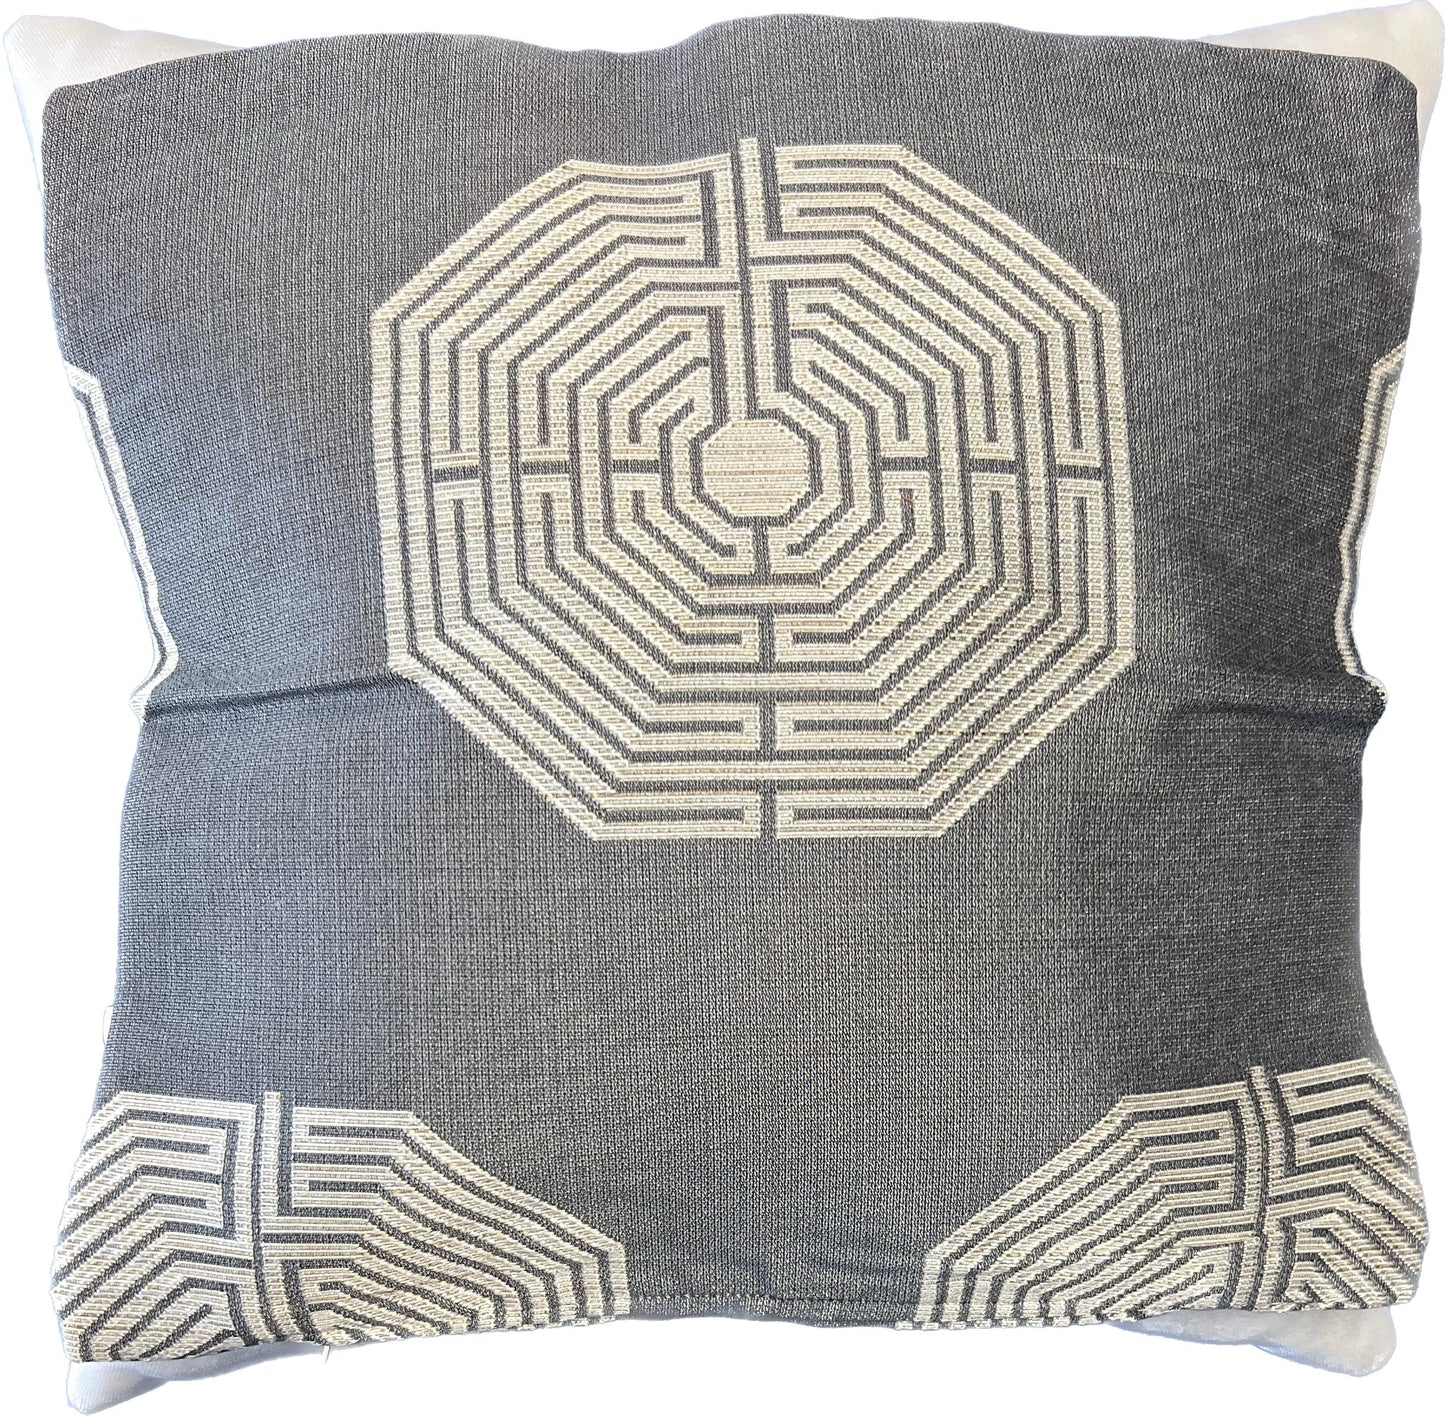 13"x13"  Maze Pillow Cover*** Special Price***